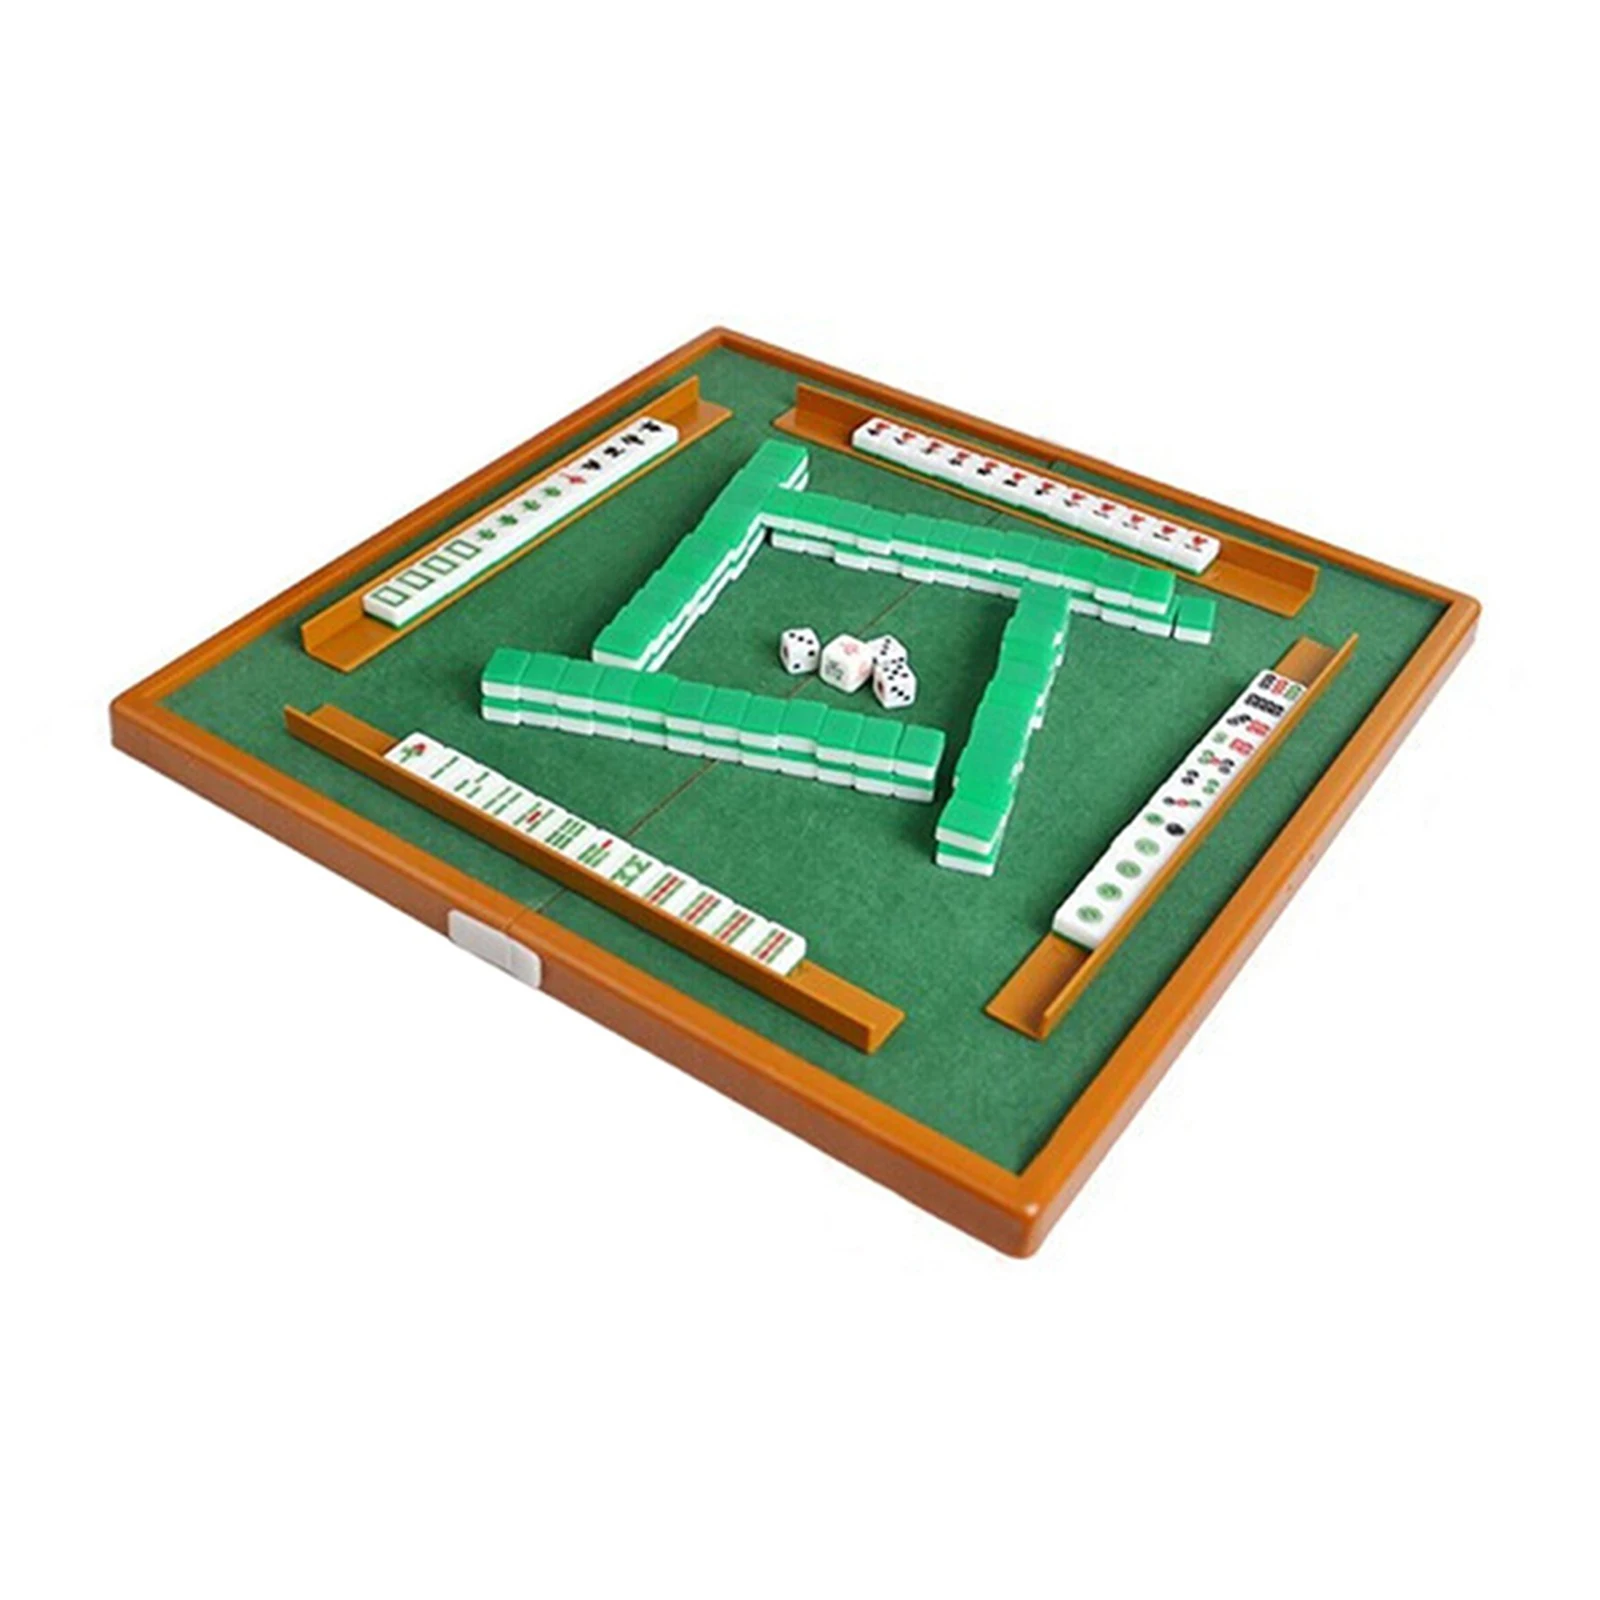 

Portable Mahjong Game Set for Easy Travel Foldable Table Included for Convenience Durable Build with Clear English Word